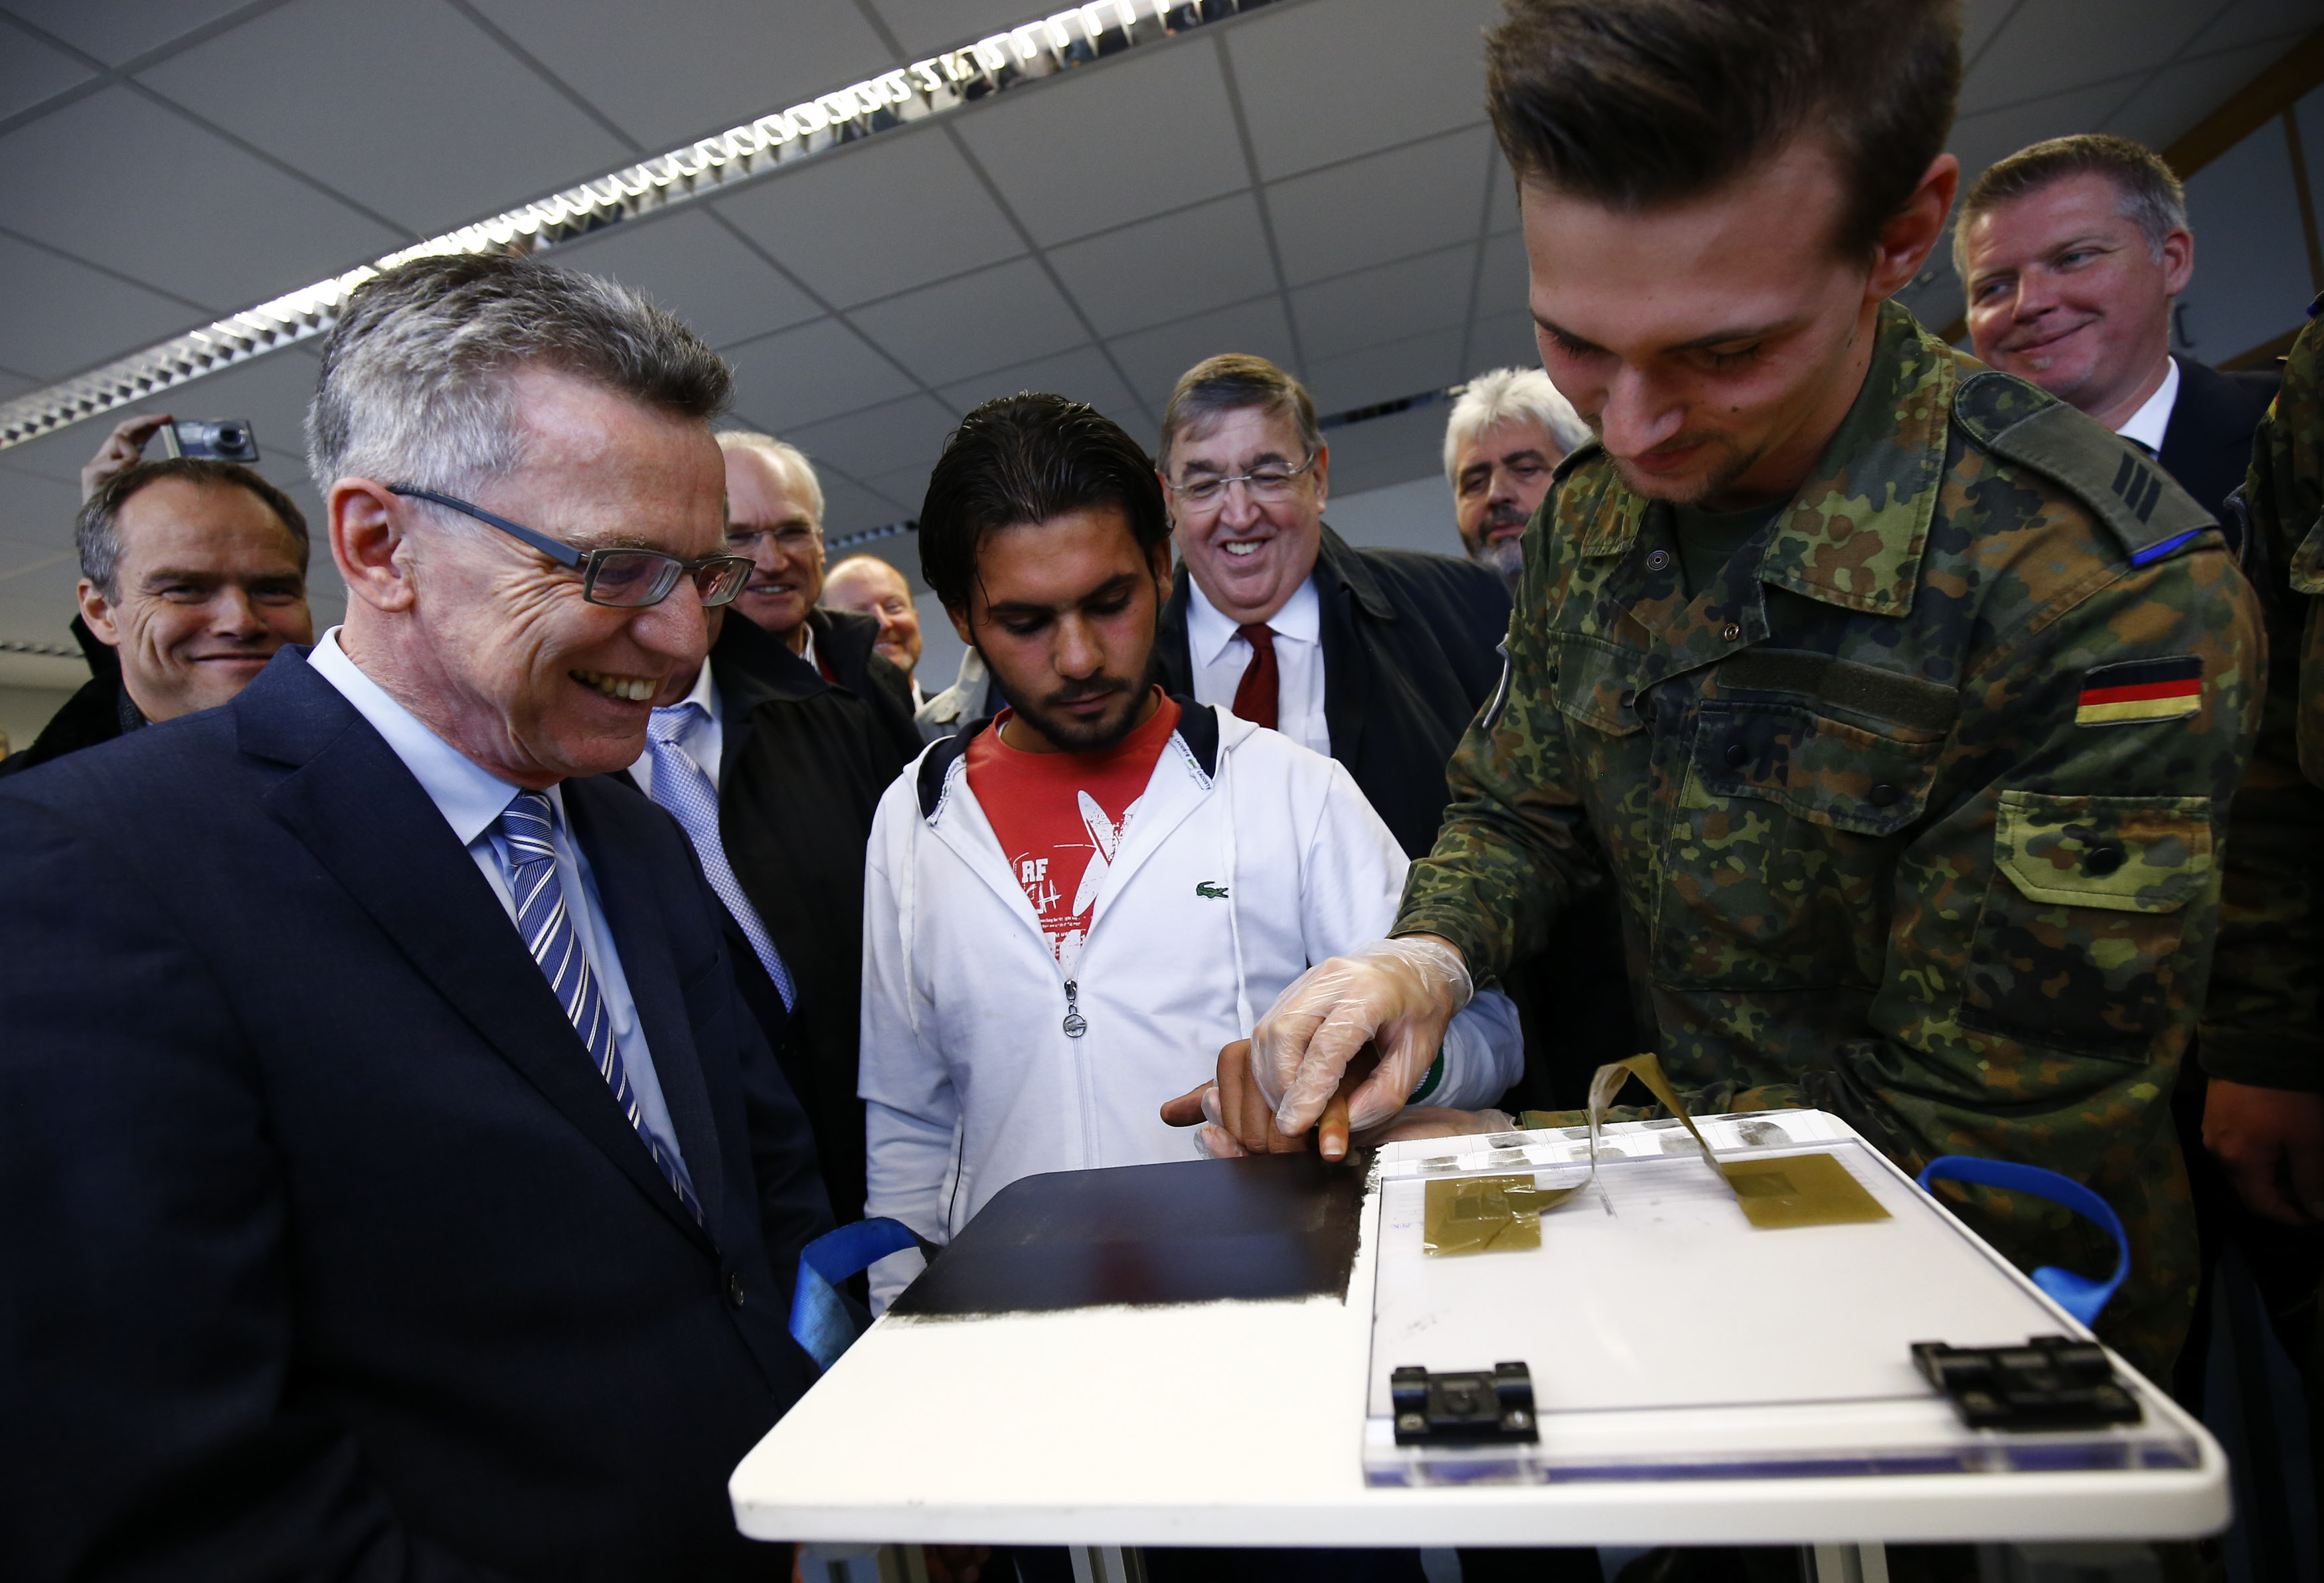 German Interior Minister Thomas de Maiziere (L) watches as a migrant from Babel in Iraq has his fingerprints taken, during a visit to Patrick-Henry Village refugee centre in Heidelberg, Germany October 22, 2015. Germany is introducing measures to tackle its refugee crisis earlier than previously expected, a top government official said on Friday, allowing accelerated deportation procedures to begin as early as next week. Germany expects a record influx of more than 800,000 migrants this year, by far the most in the European Union. With the new measures, Berlin is aiming to cope better with the unprecedented number of arrivals and to stem the influx. Picture taken October 22. REUTERS/Kai Pfaffenbach